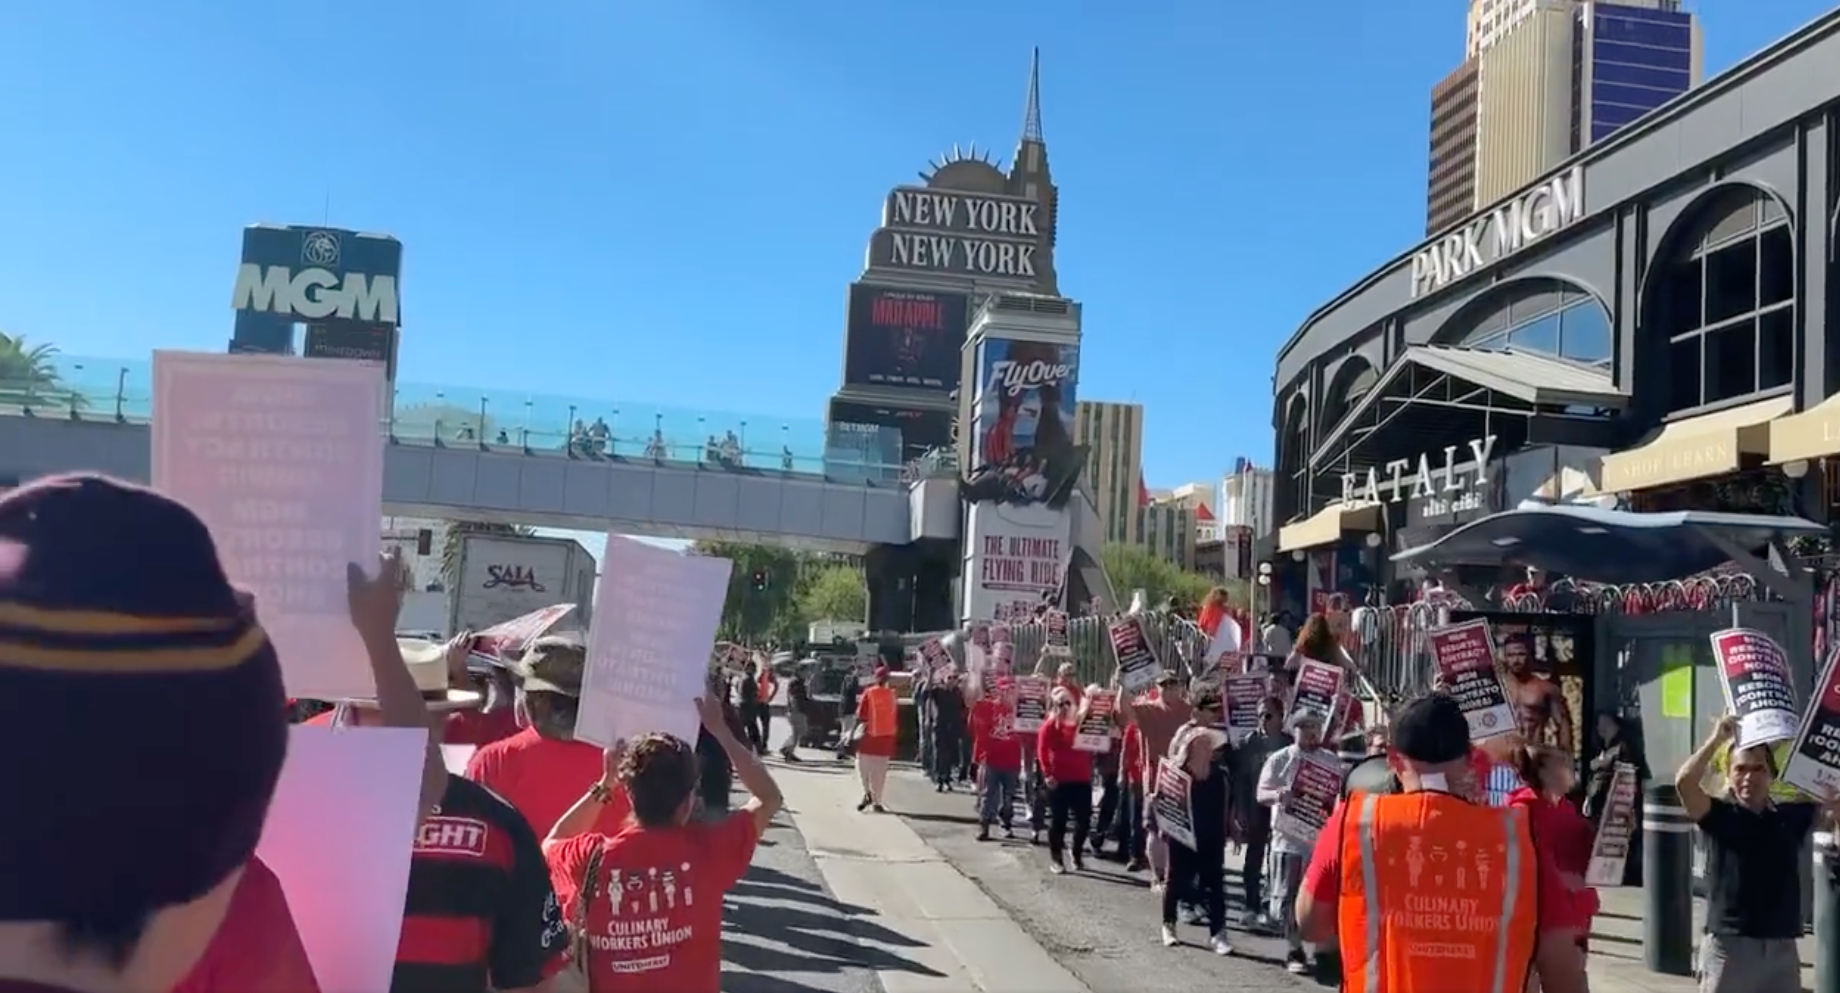 Culinary and Bartenders Union members will picket on the Las Vegas Strip.